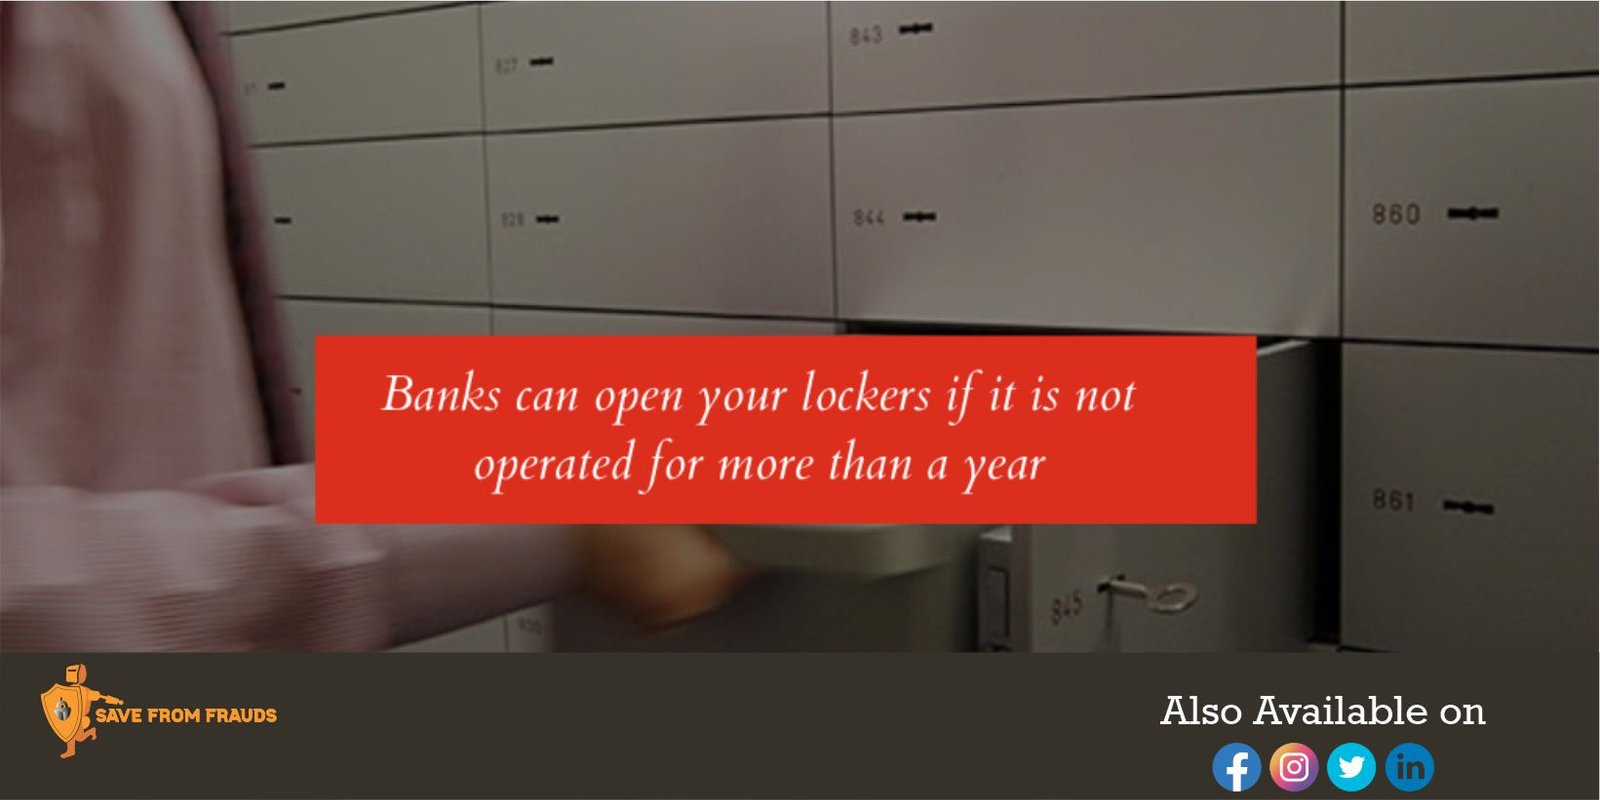 Banks can open your lockers if you haven't used them in over a year.